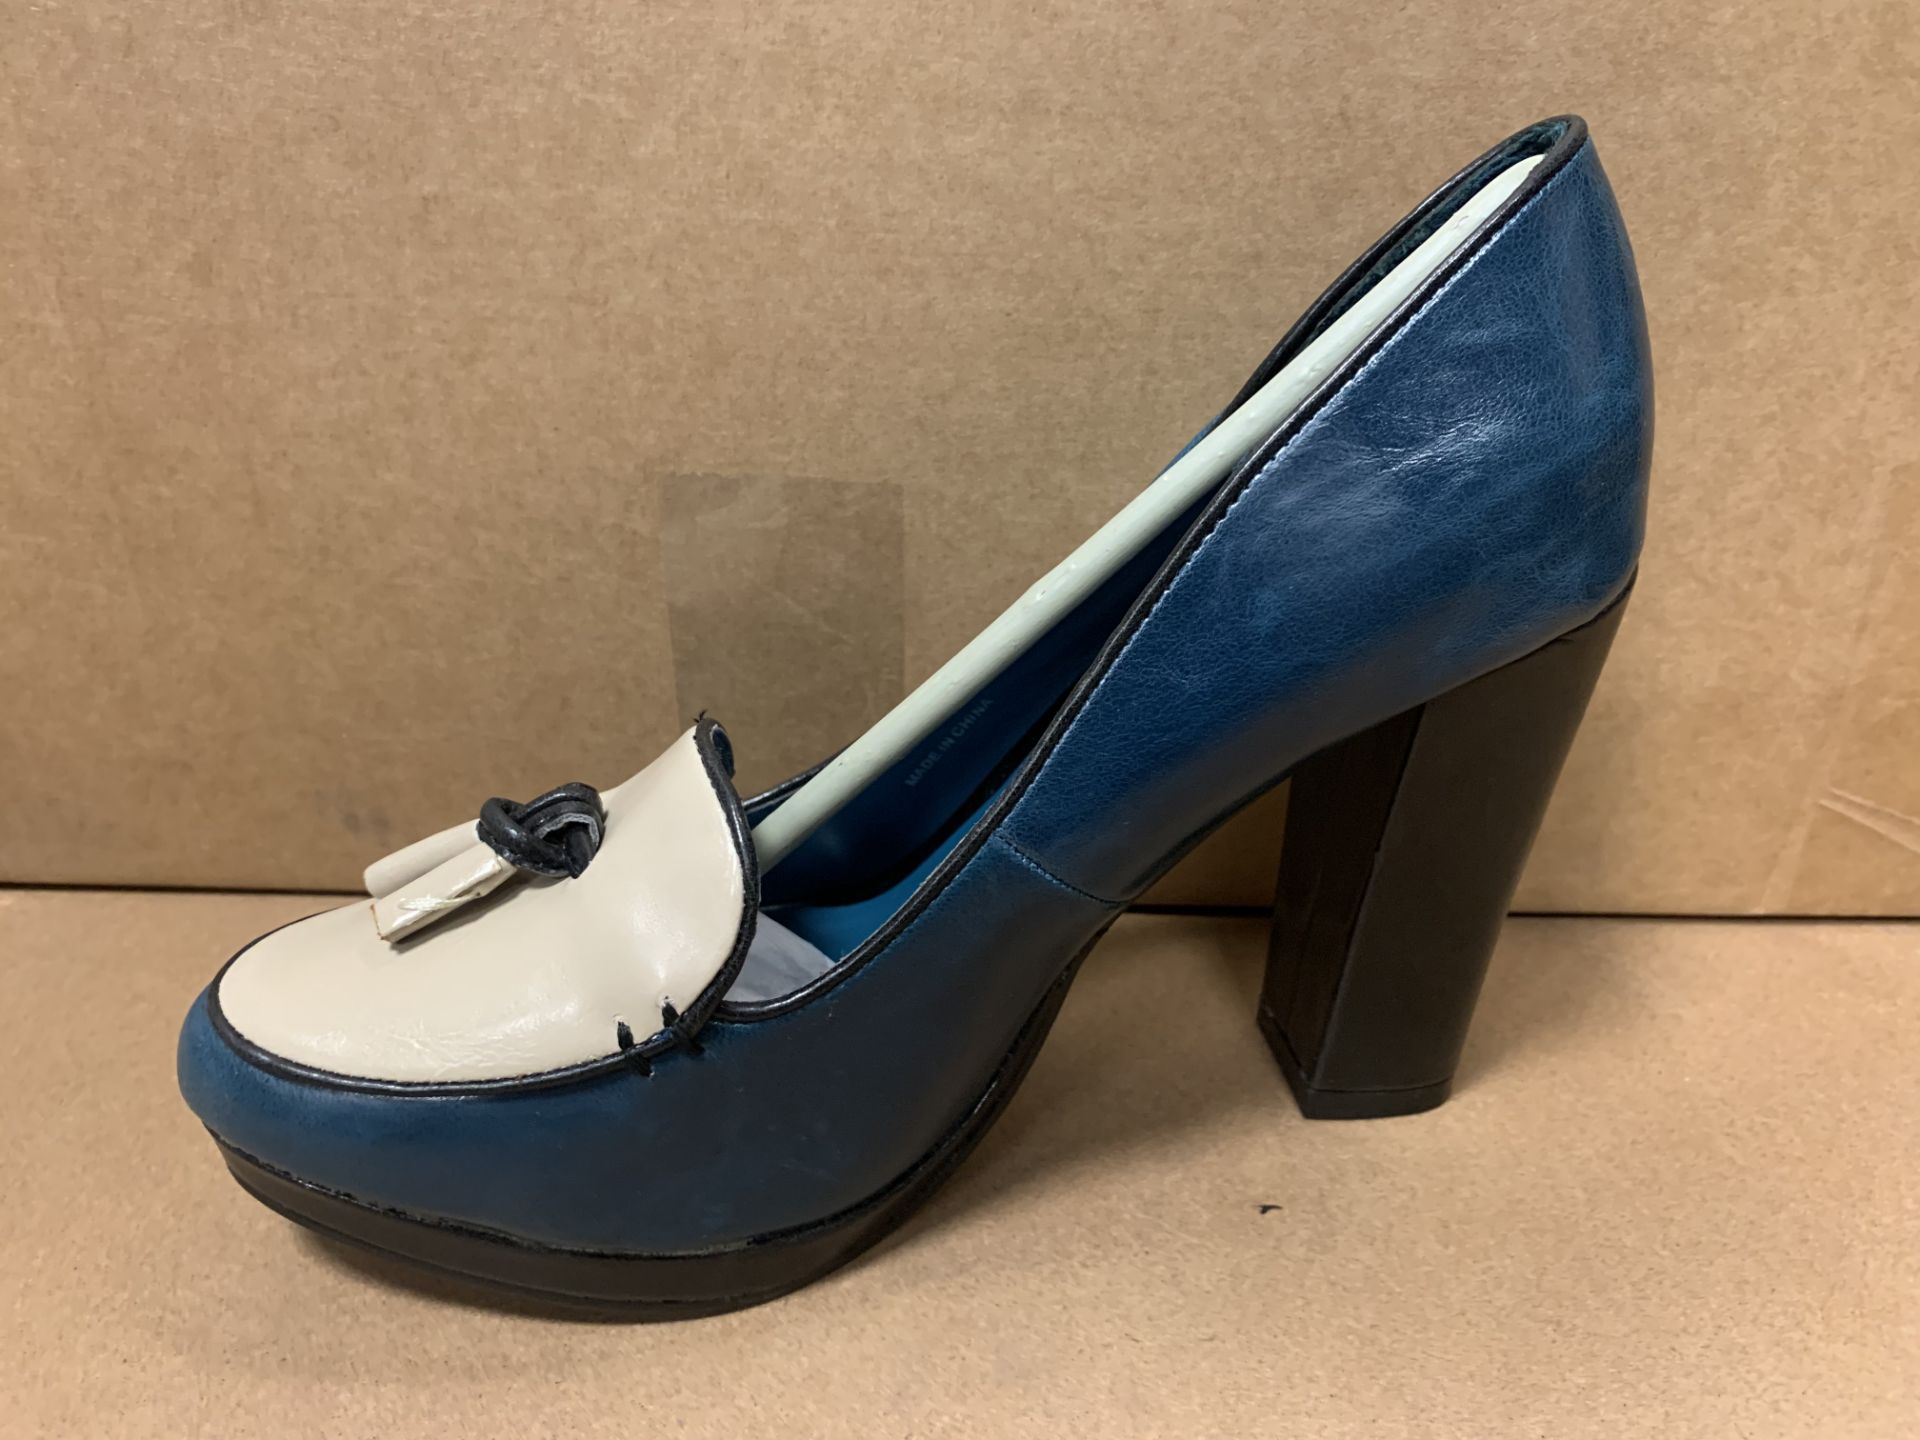 27 X BRAND NEW PAIRS OF BLUE HIGH HEELED SHOES